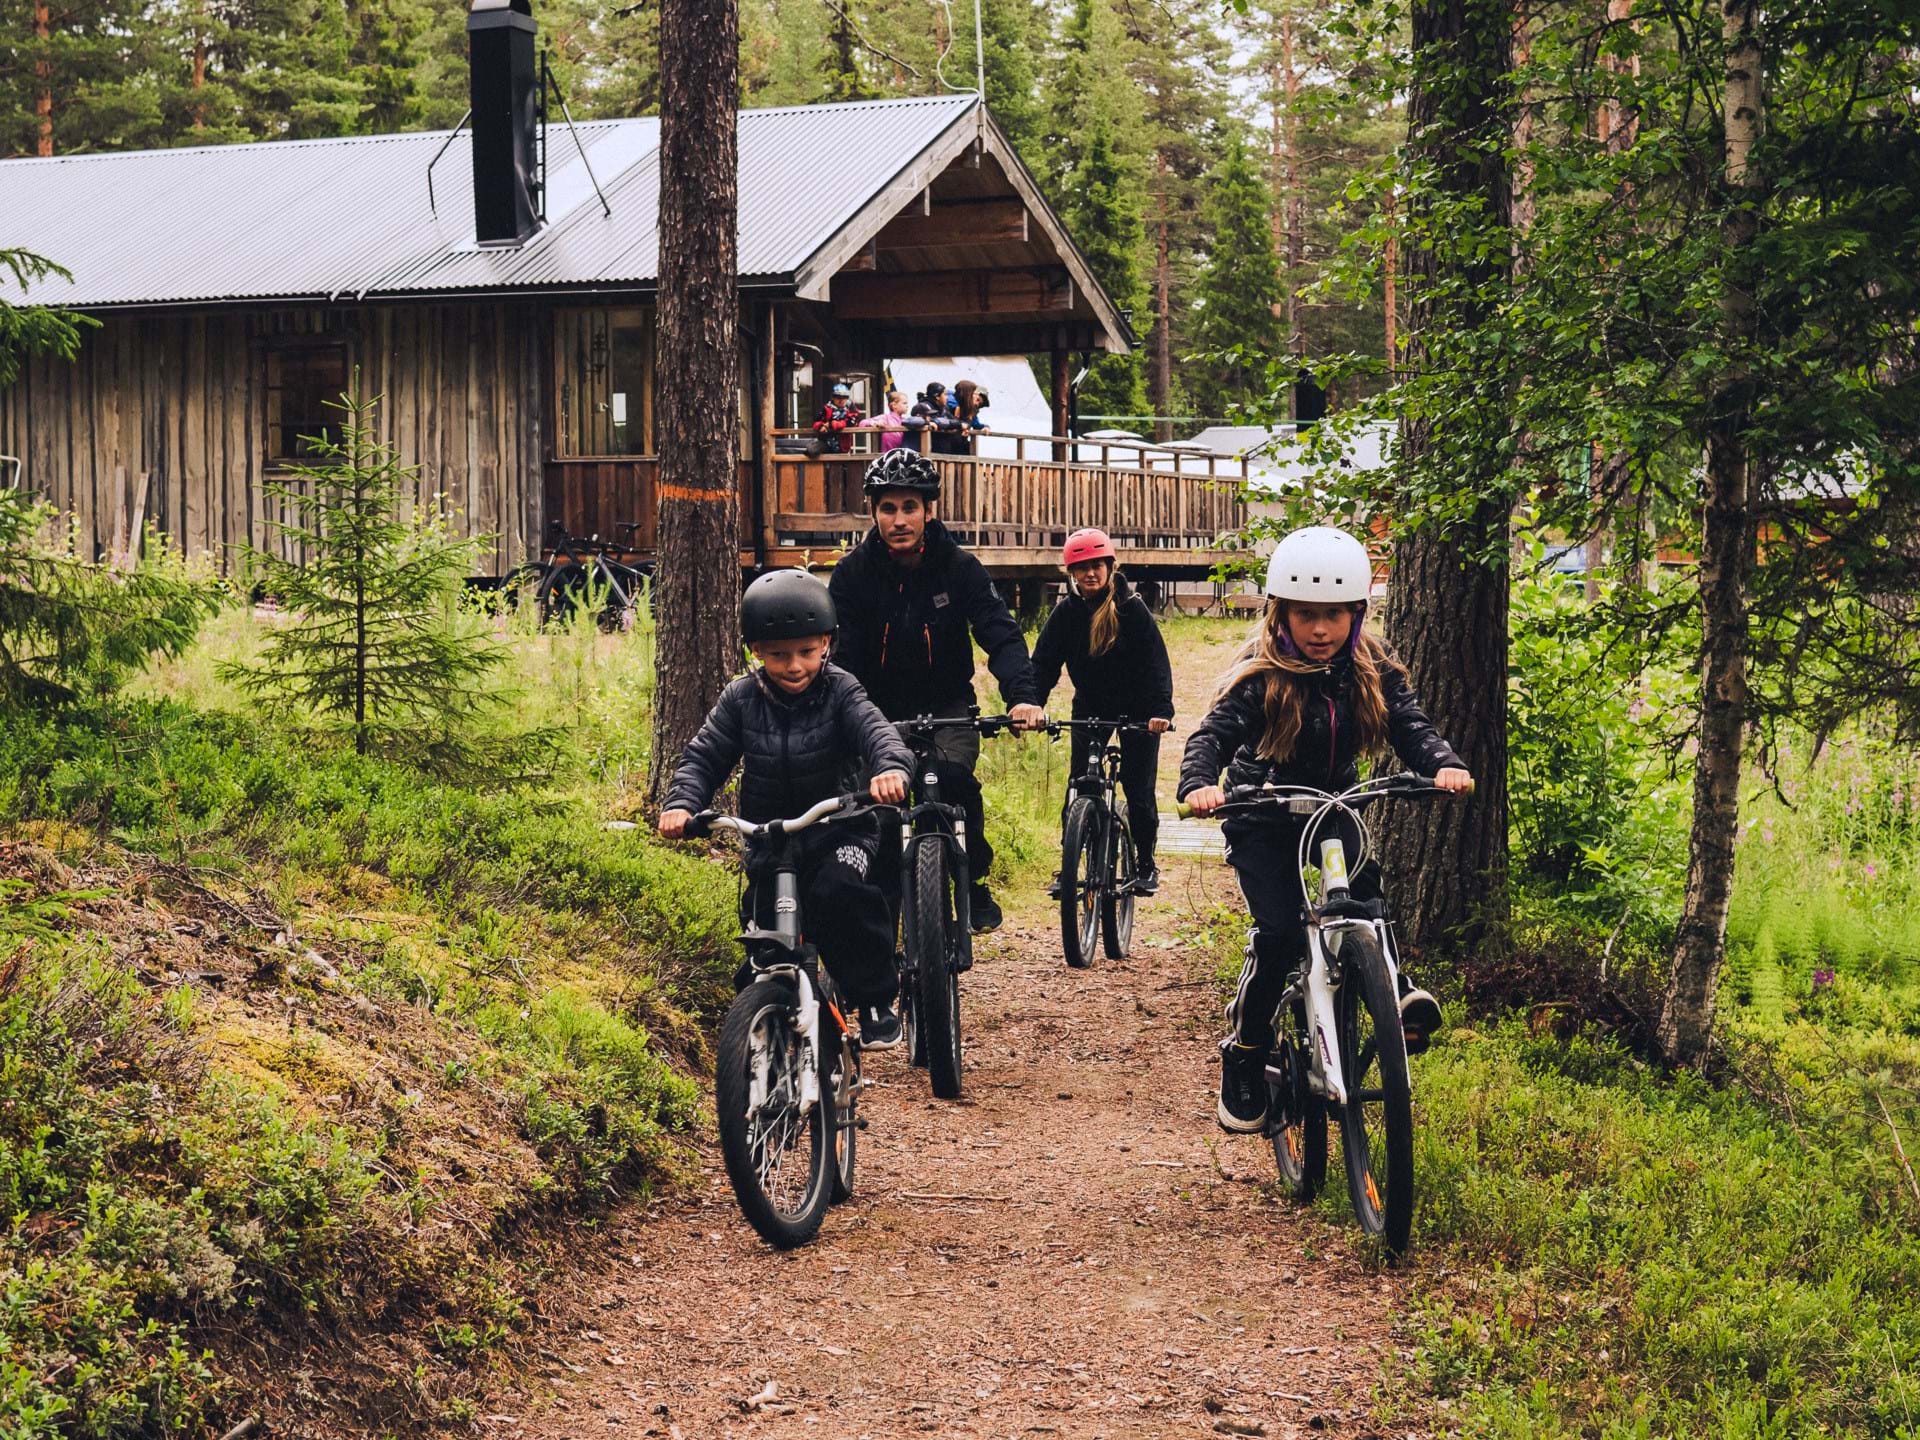 Charlotta and her family cycle along one of the paths in the forest.